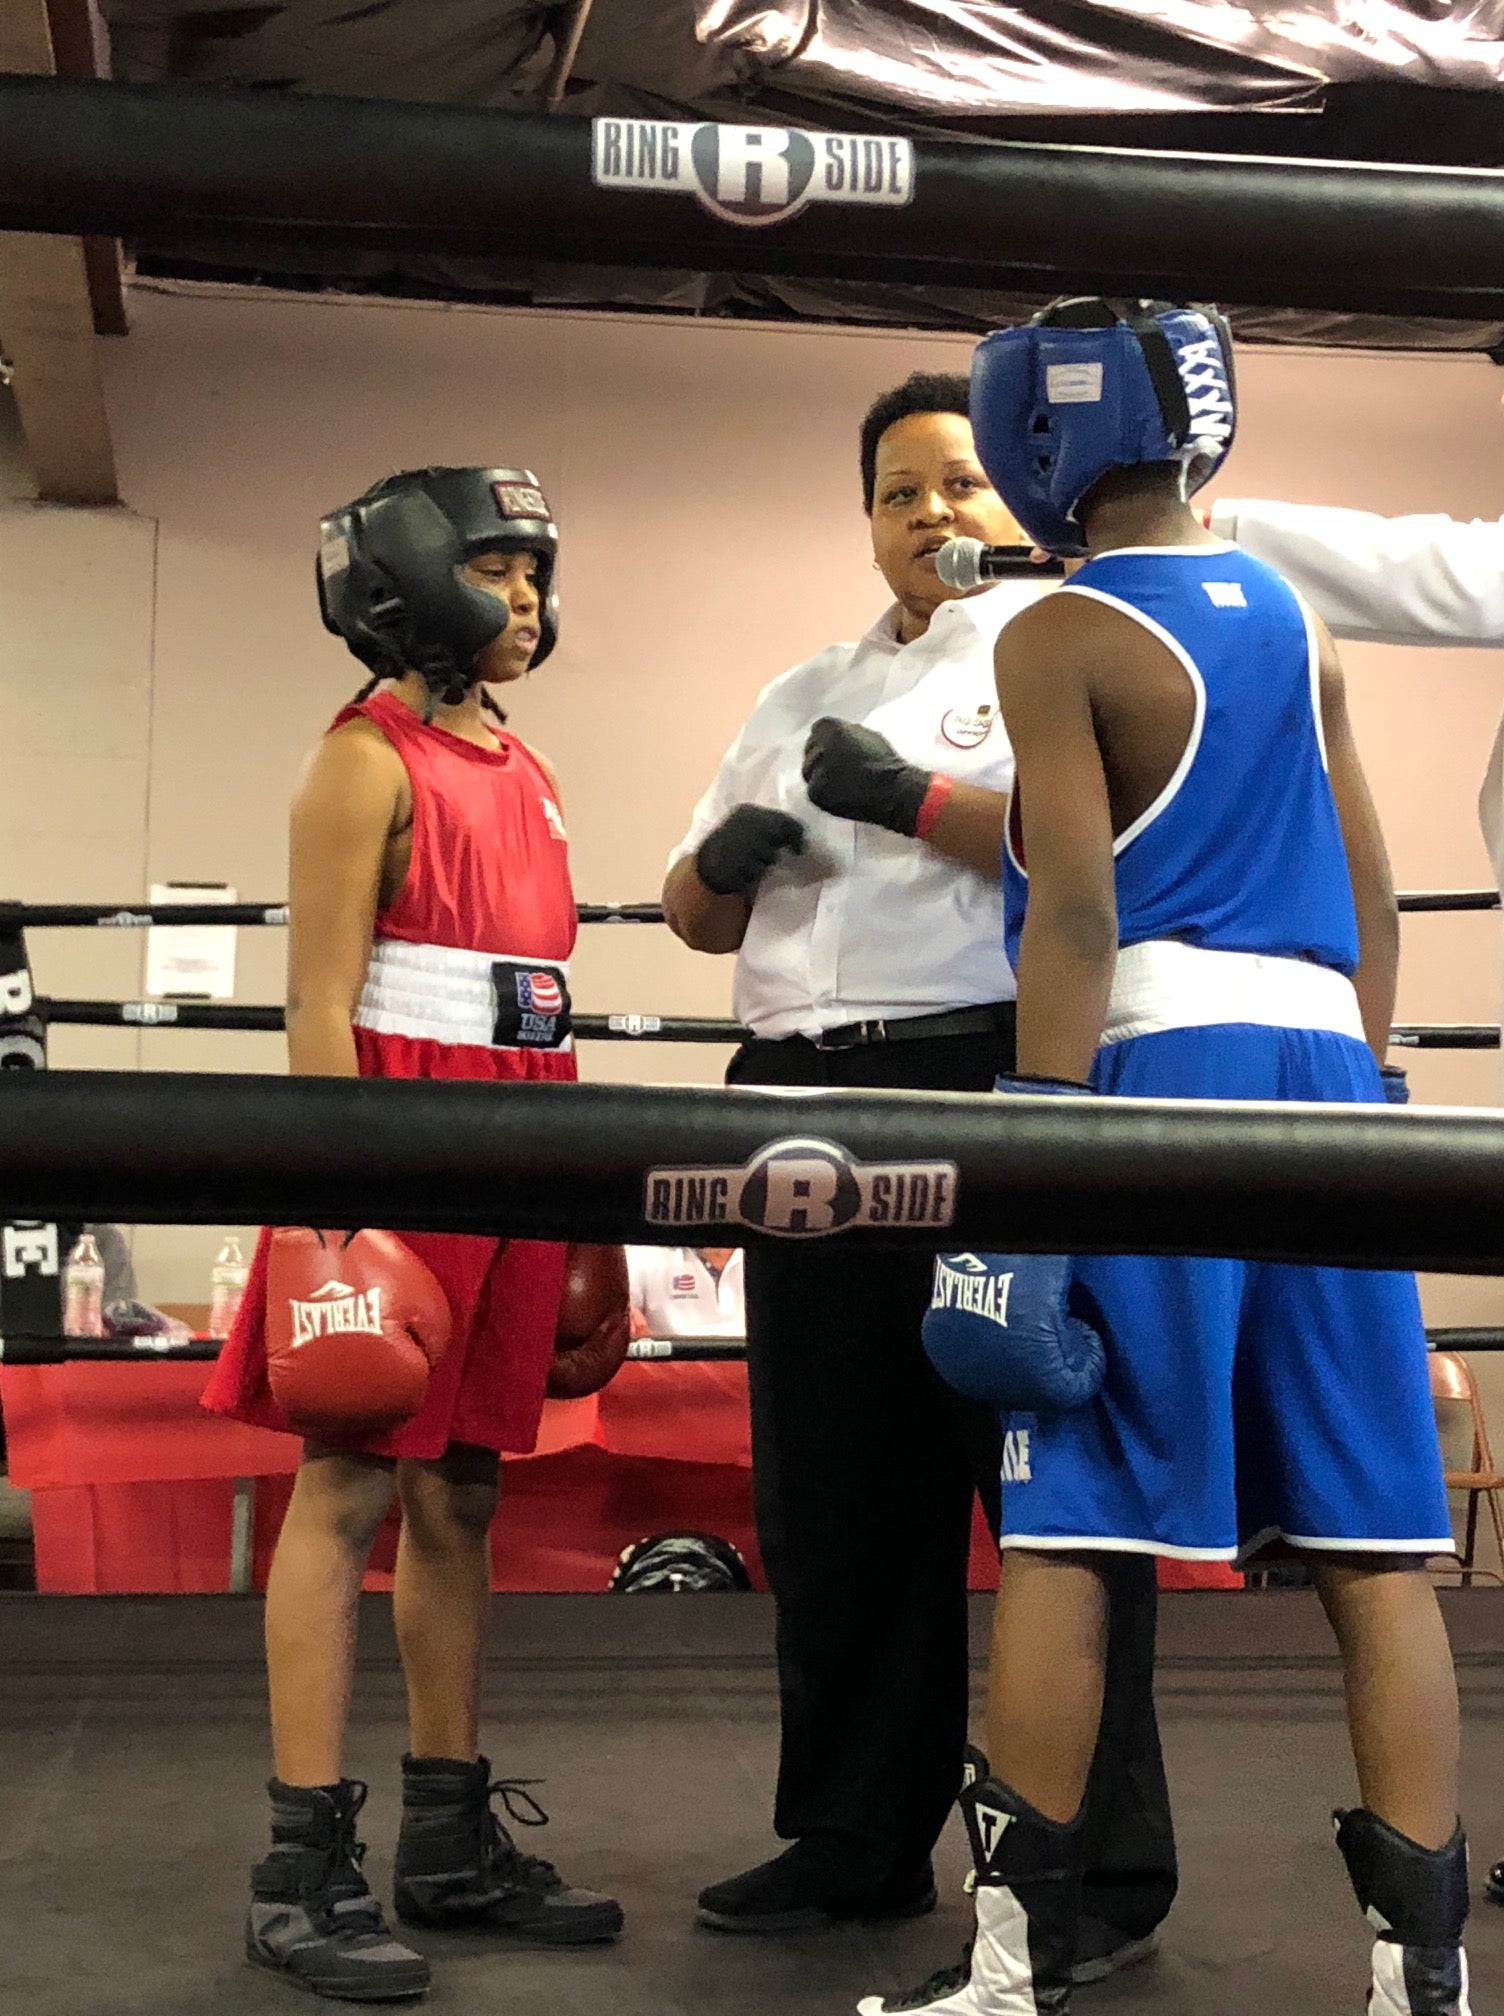 GJWB ambassador Lee Smith in the ring with two female boxers 